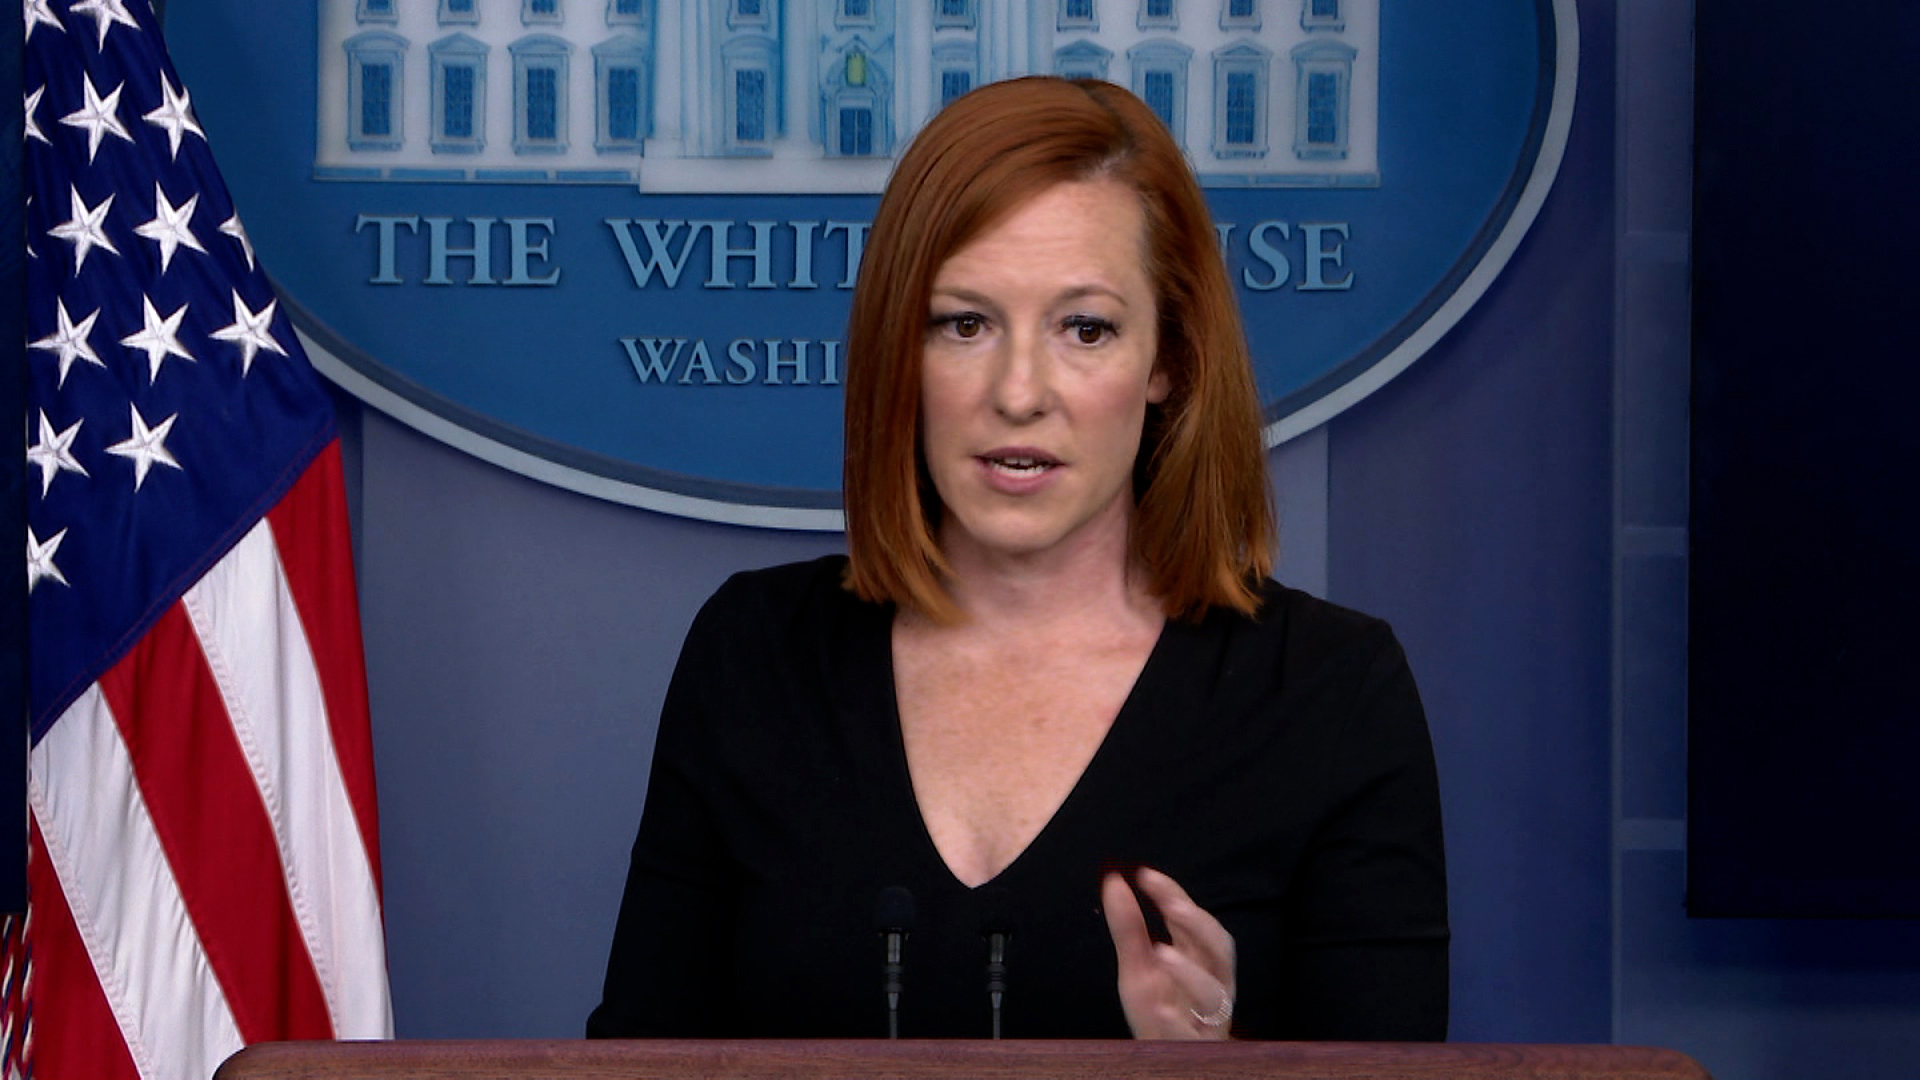 White House press secretary Jen Psaki speaks during a press briefing at the White House in Washington, DC, on June 30.